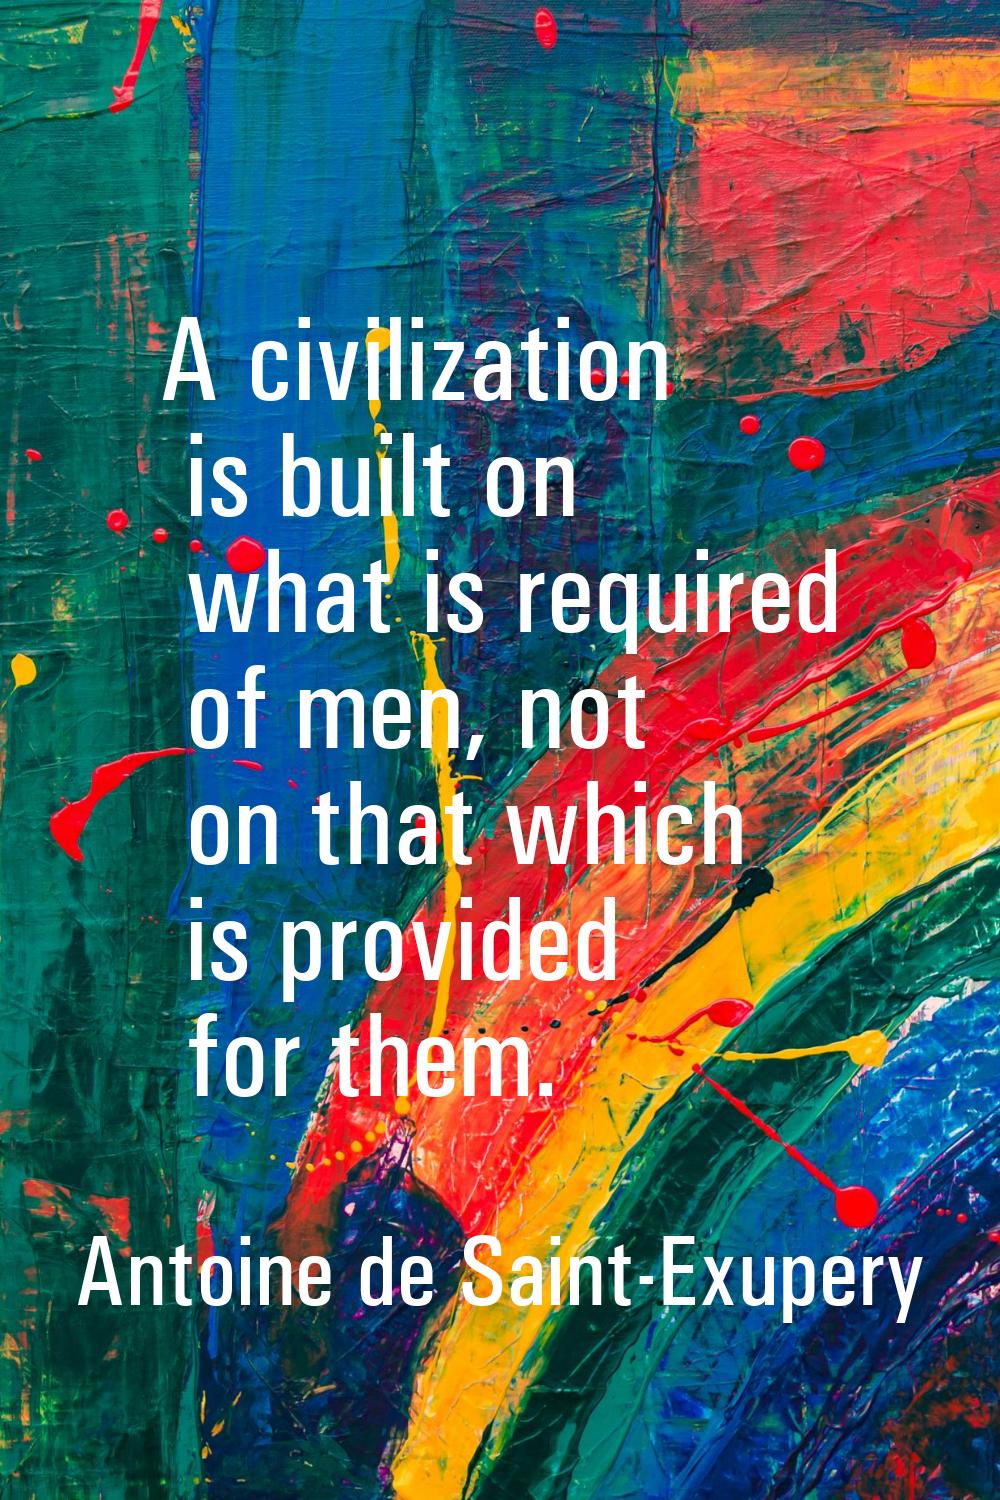 A civilization is built on what is required of men, not on that which is provided for them.